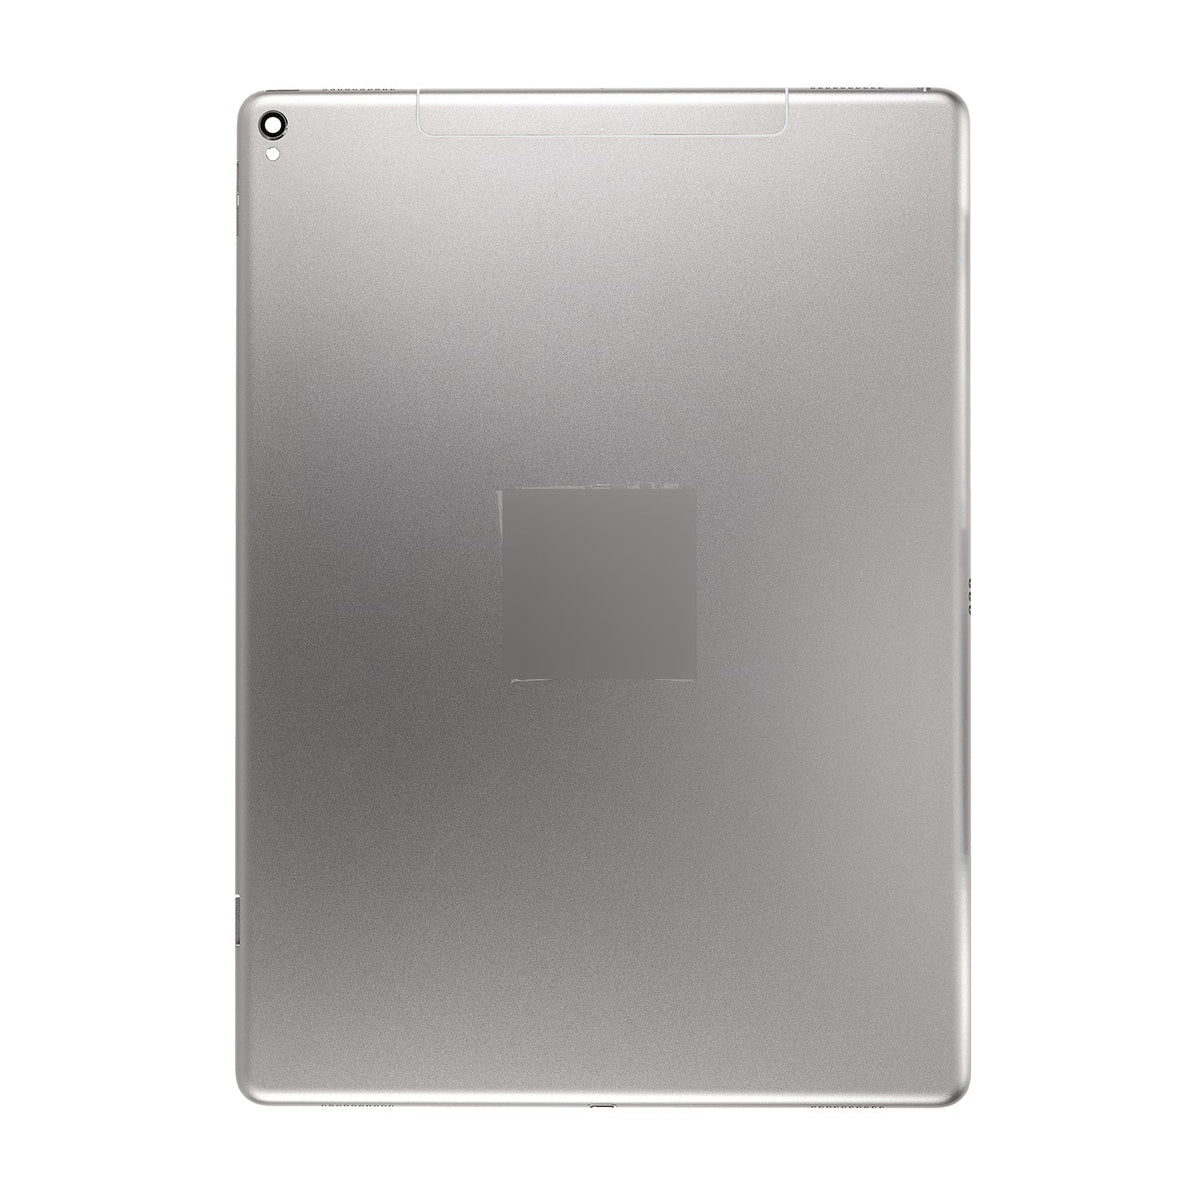 BACK COVER WIFI + CELLULAR VERSION FOR IPAD PRO 12.9 2ND GEN- GREY